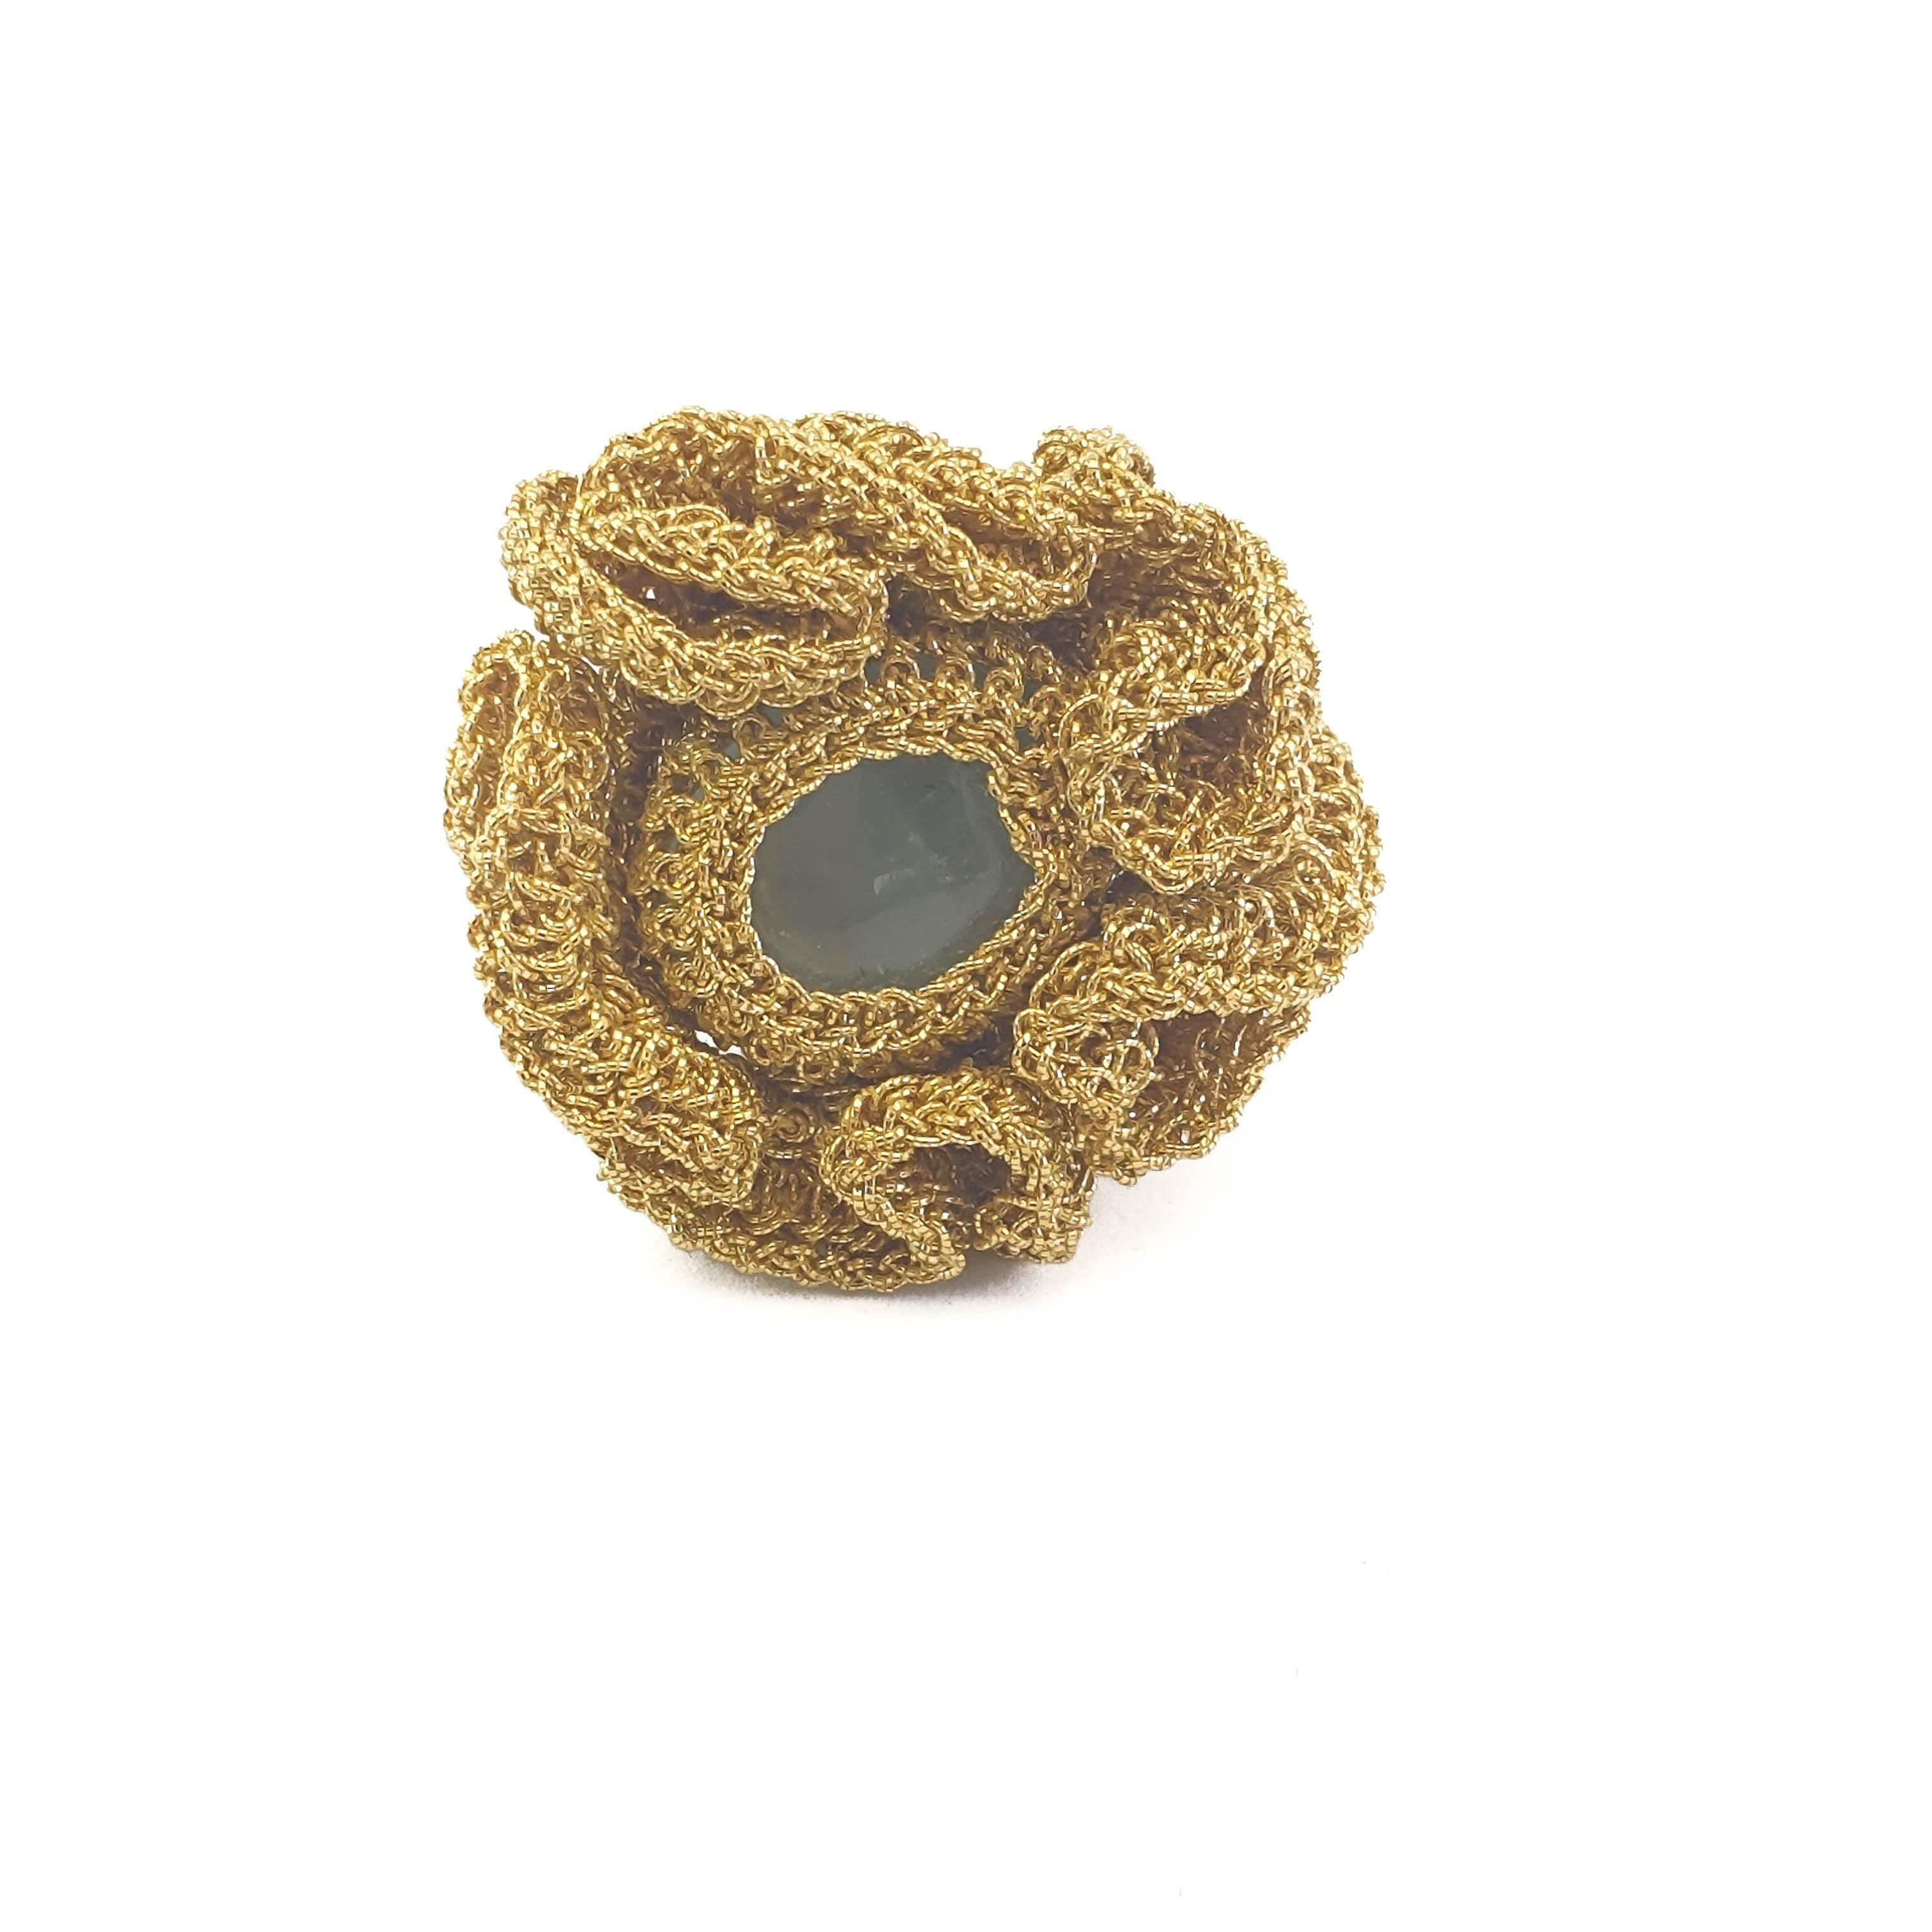 A beautifully crafted, crochet ring. Handmade with 18 Karat gold thread (13.25 grams) and a milky light blue Aquamarine (weighing 1.75 grams/8.75 carats). This ring is a US size 7. It can be stretched a little to fit larger sizes. This ring can be